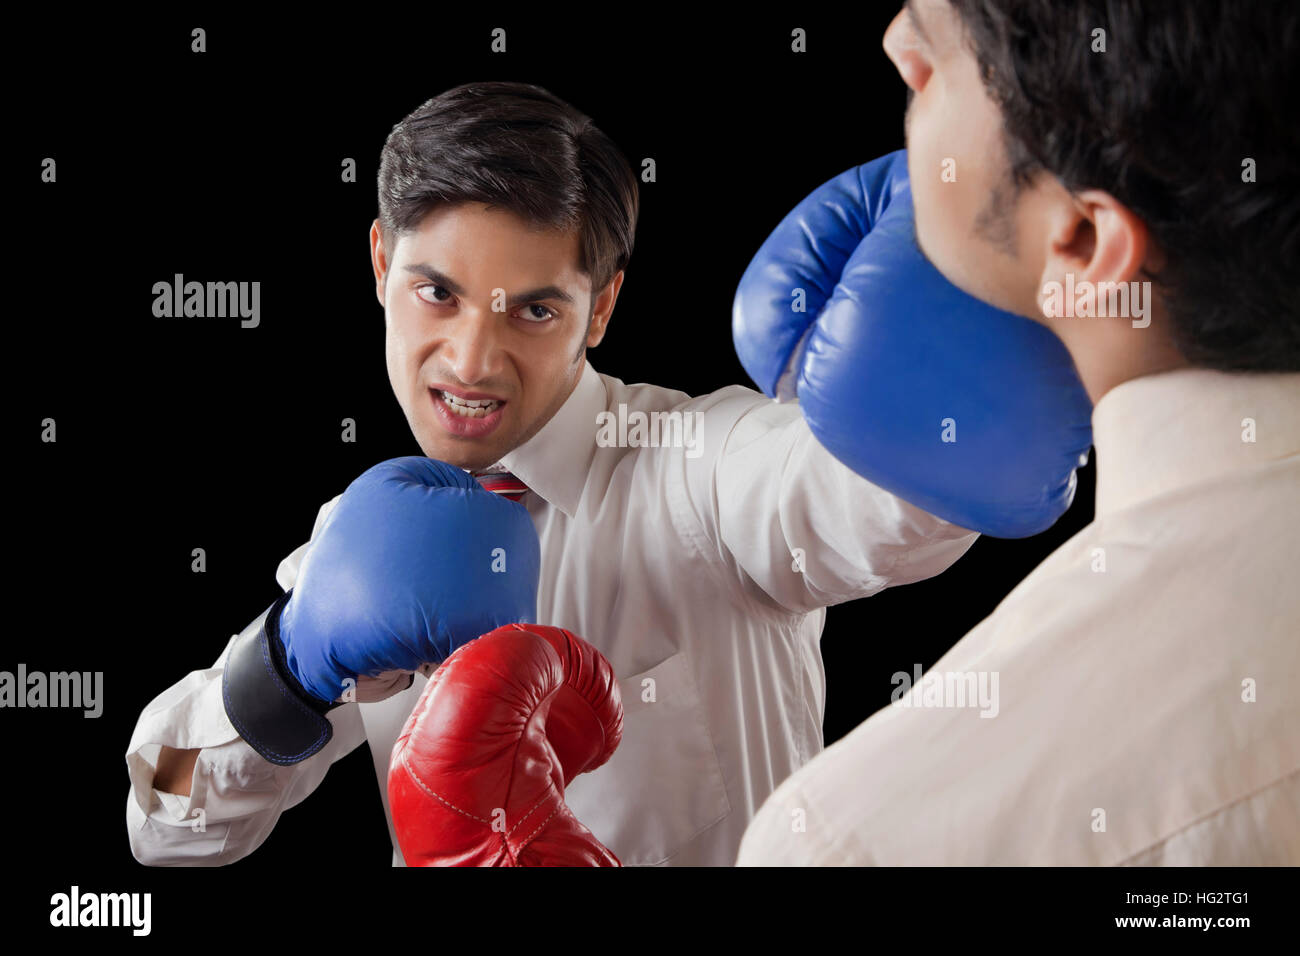 Businessmen fighting in boxing ring Stock Photo